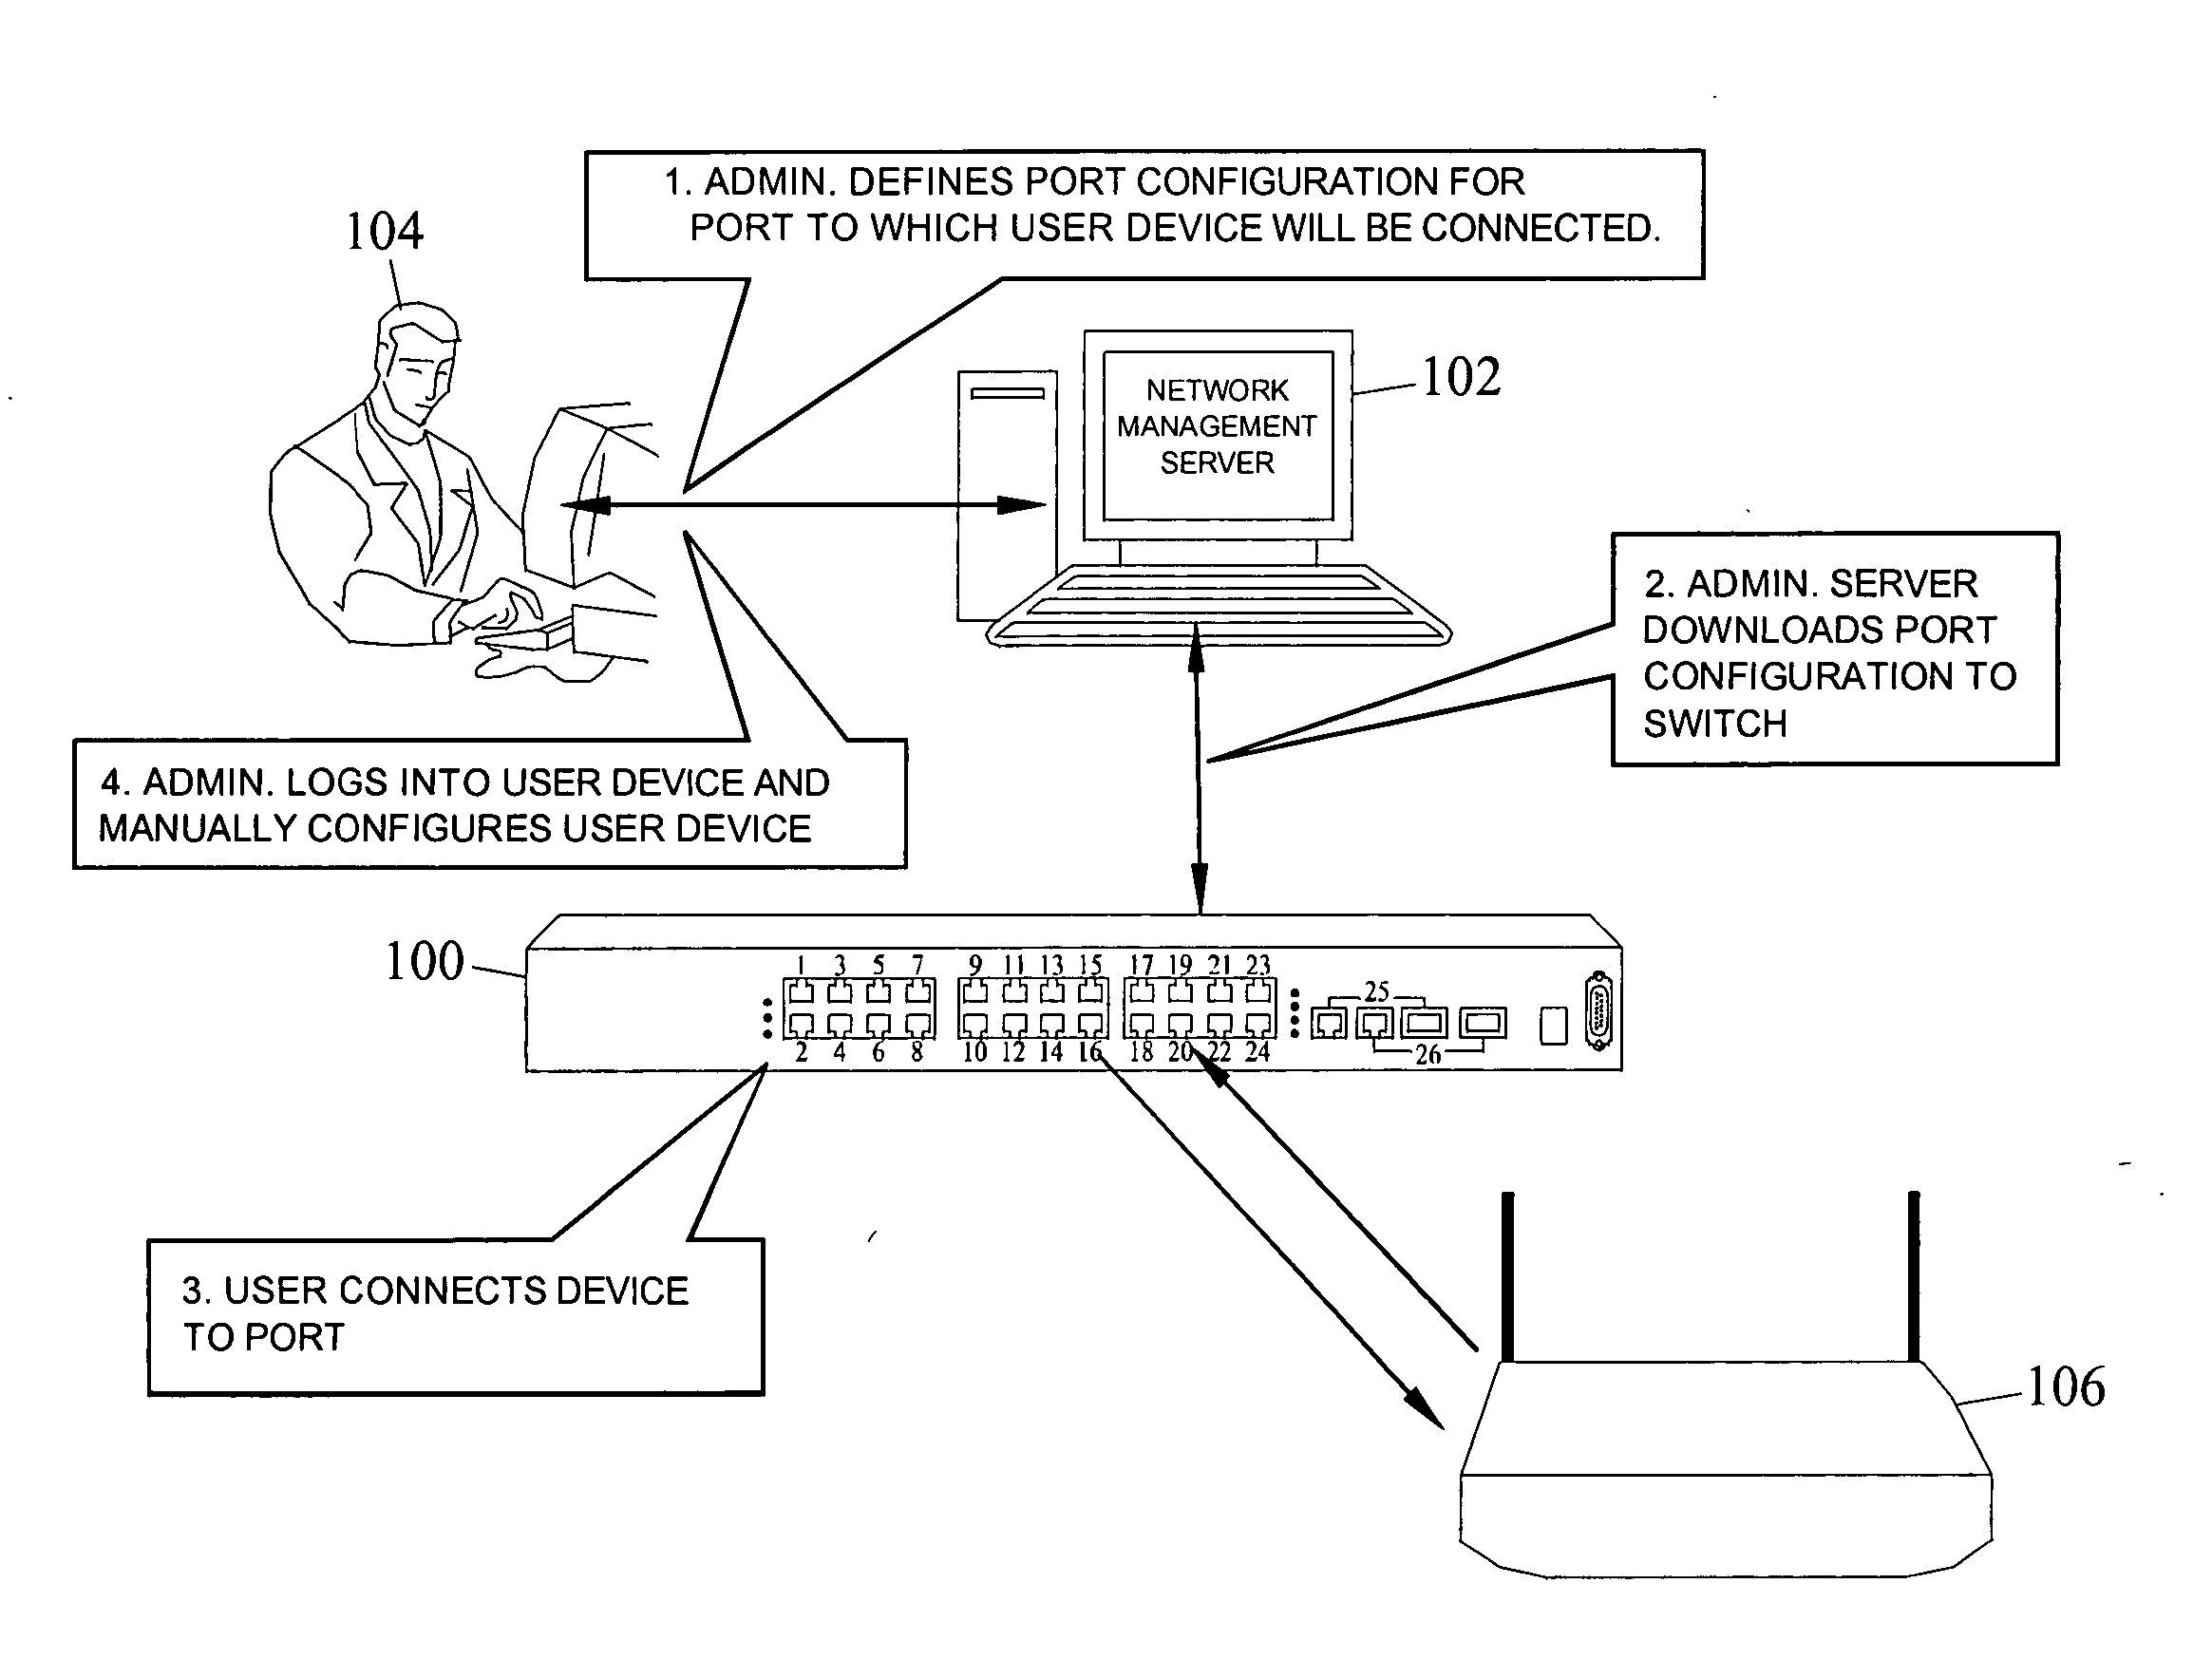 Methods, systems, and computer program products for dynamic network access device port and user device configuration for implementing device-based and user-based policies